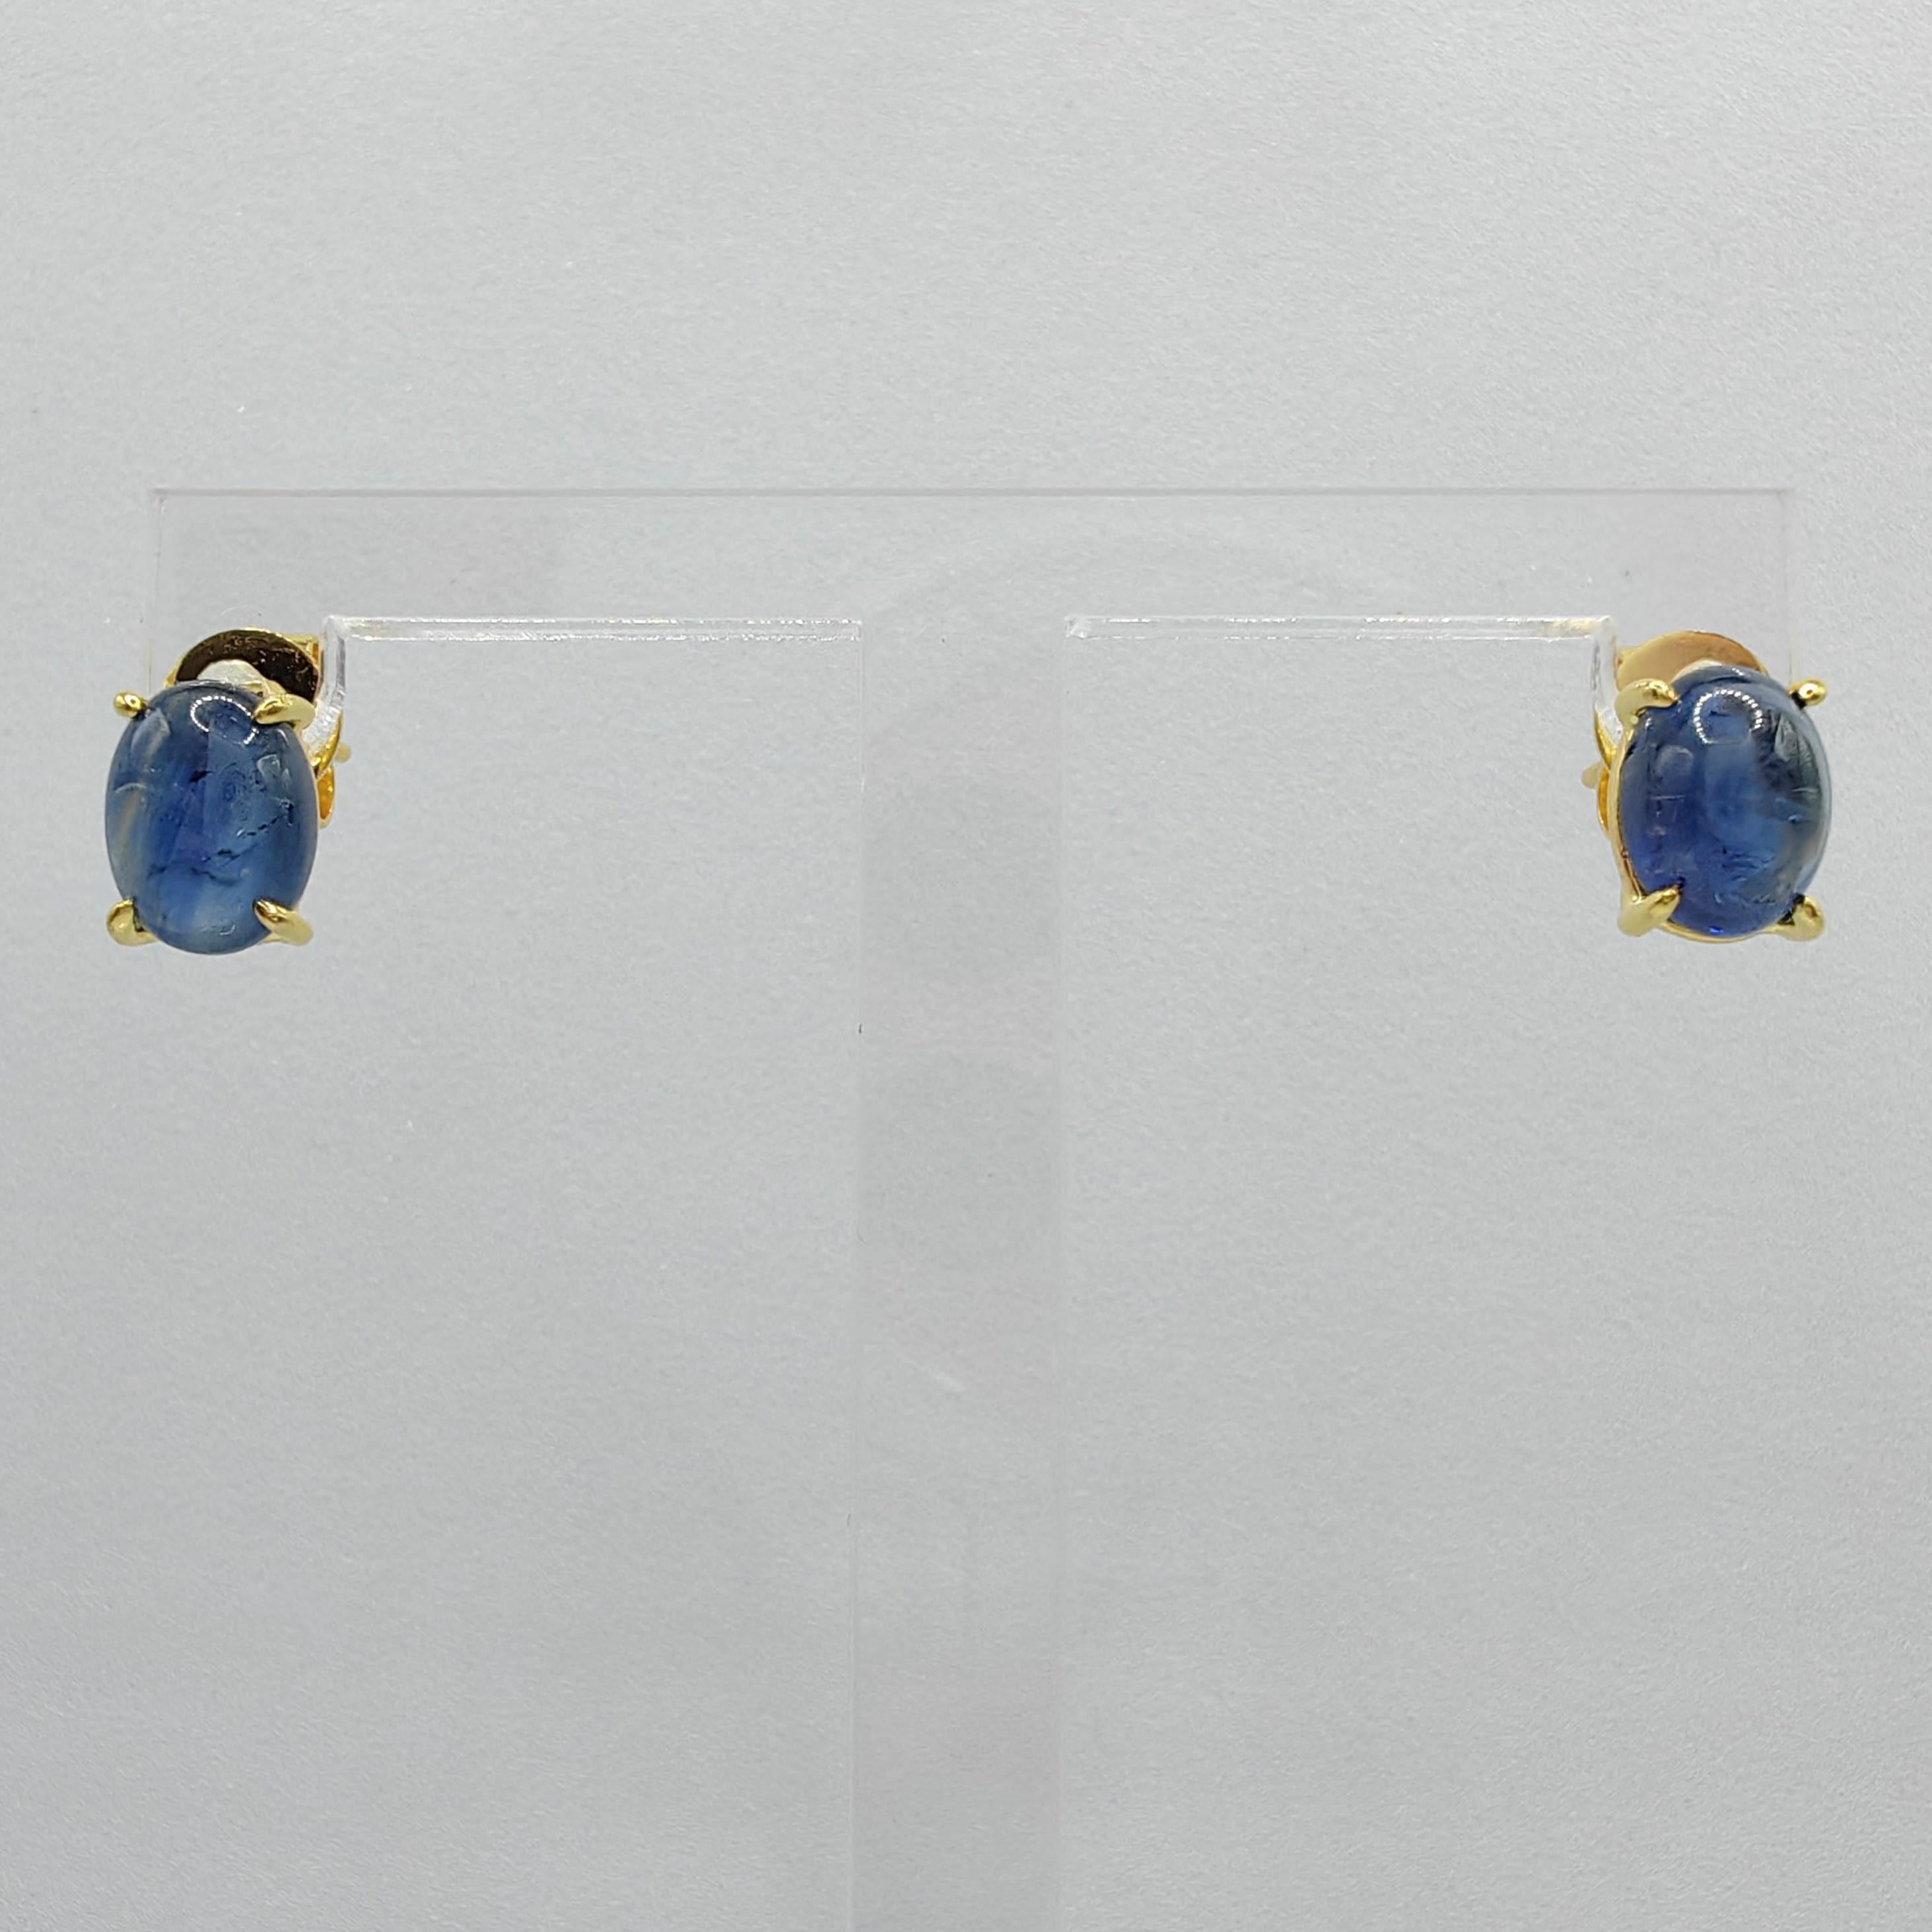 Introducing our stunning Matched 3.86 Carat 8x6mm Cabochon Blue Sapphire Stud Earrings, where the timeless beauty of blue sapphires and the elegance of 18K yellow gold harmonize to create a truly remarkable piece.

These earrings feature two